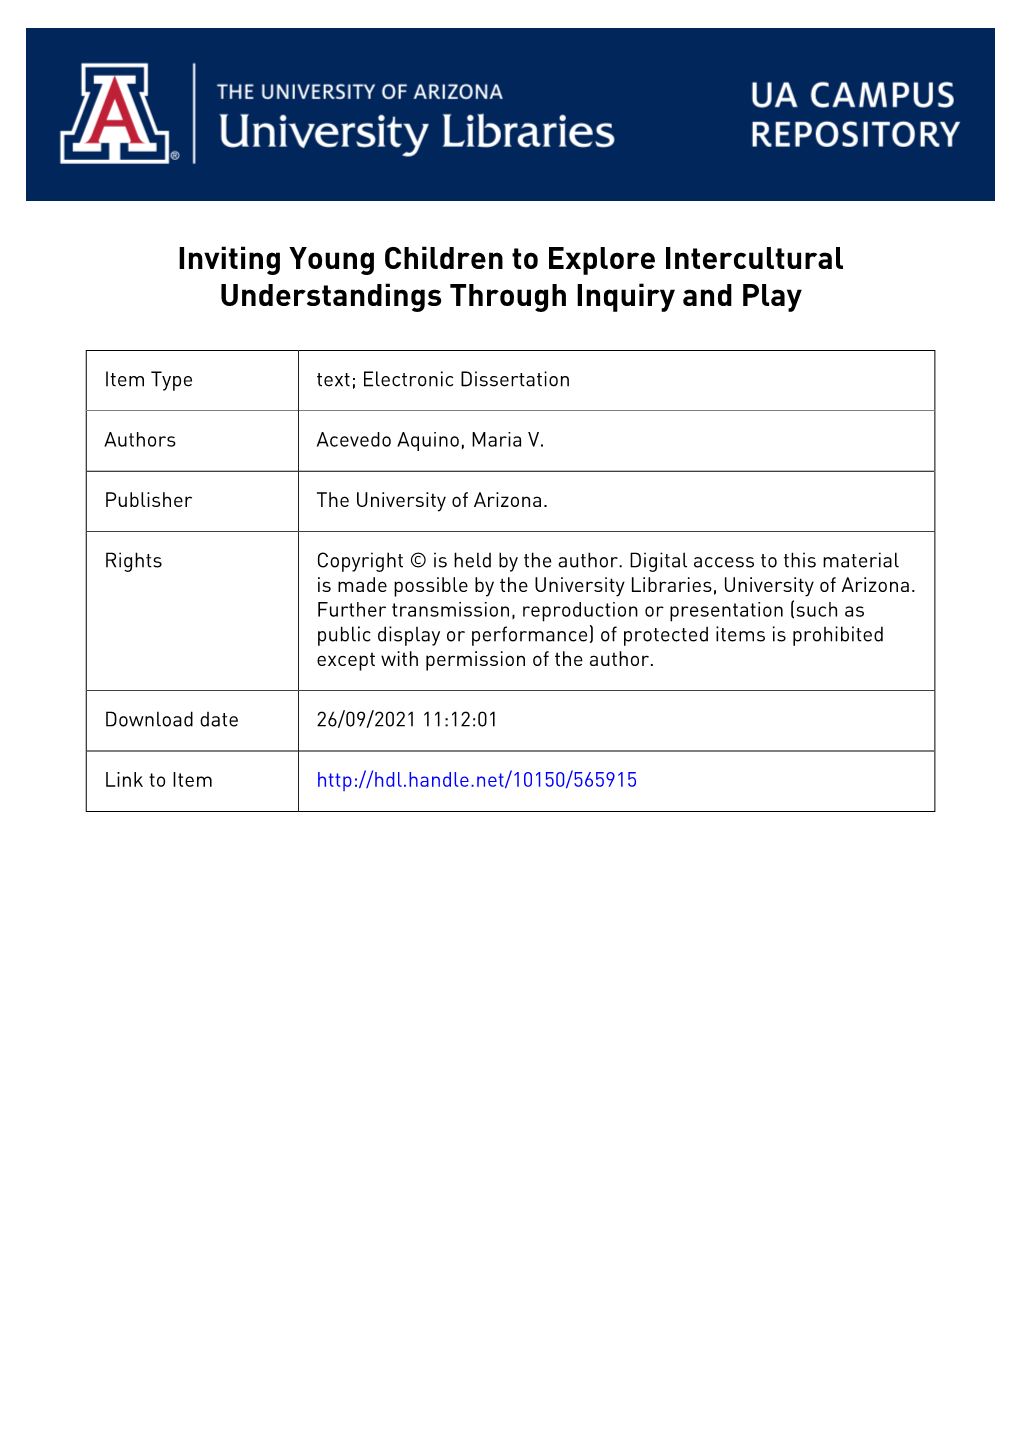 Inviting Young Children to Explore Intercultural Understandings Through Inquiry and Play